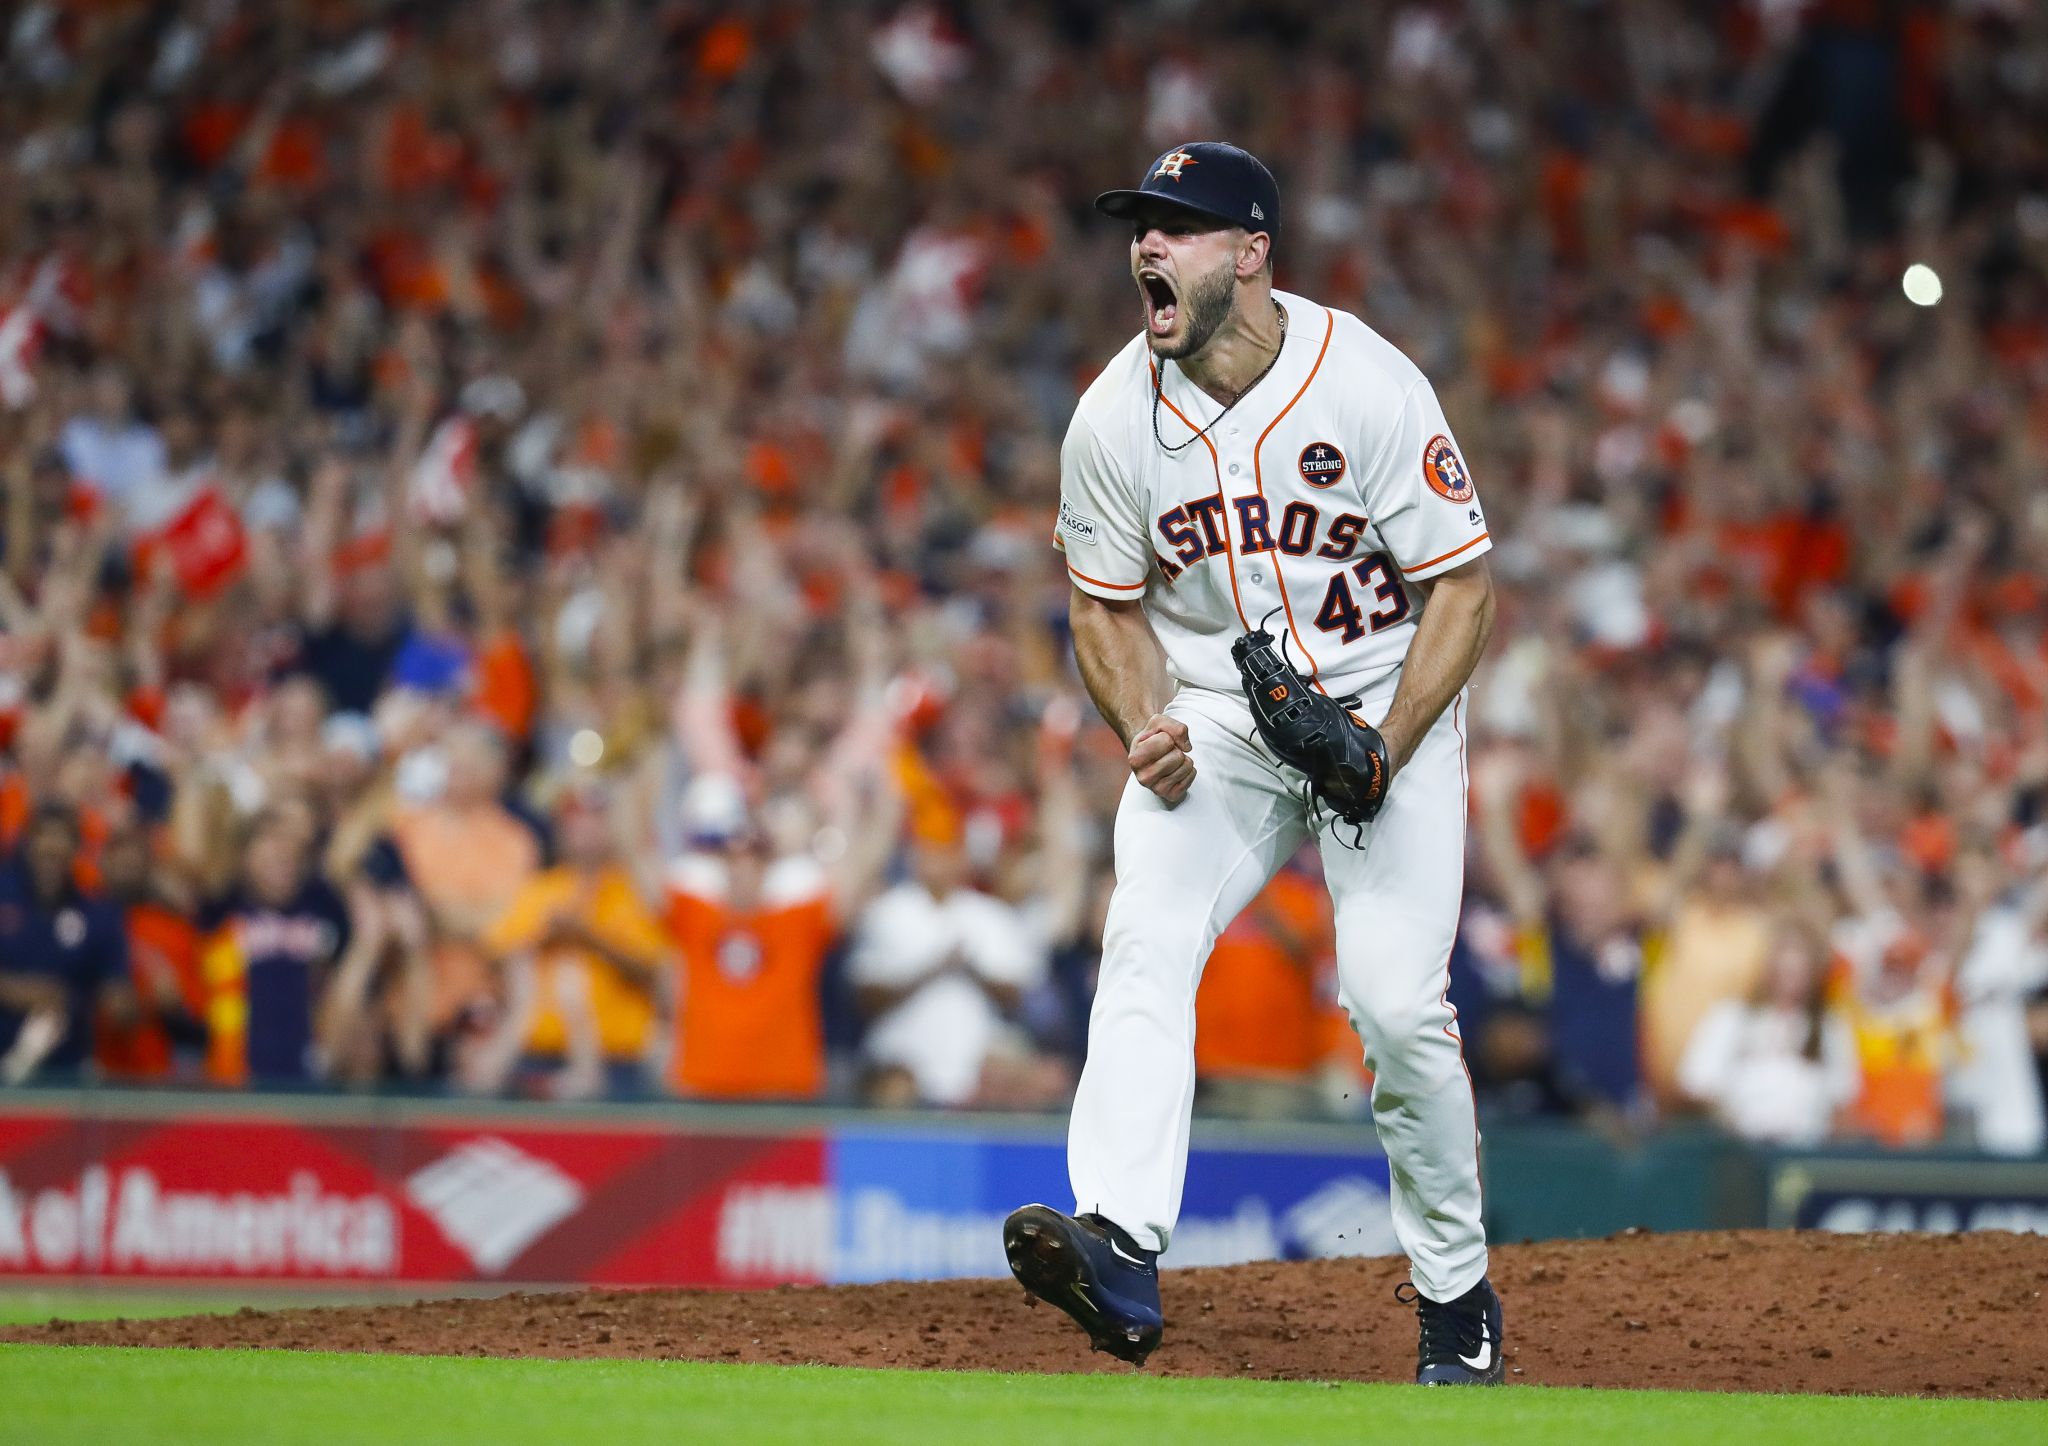 Lance McCullers to start Game 3 of World Series for Astros